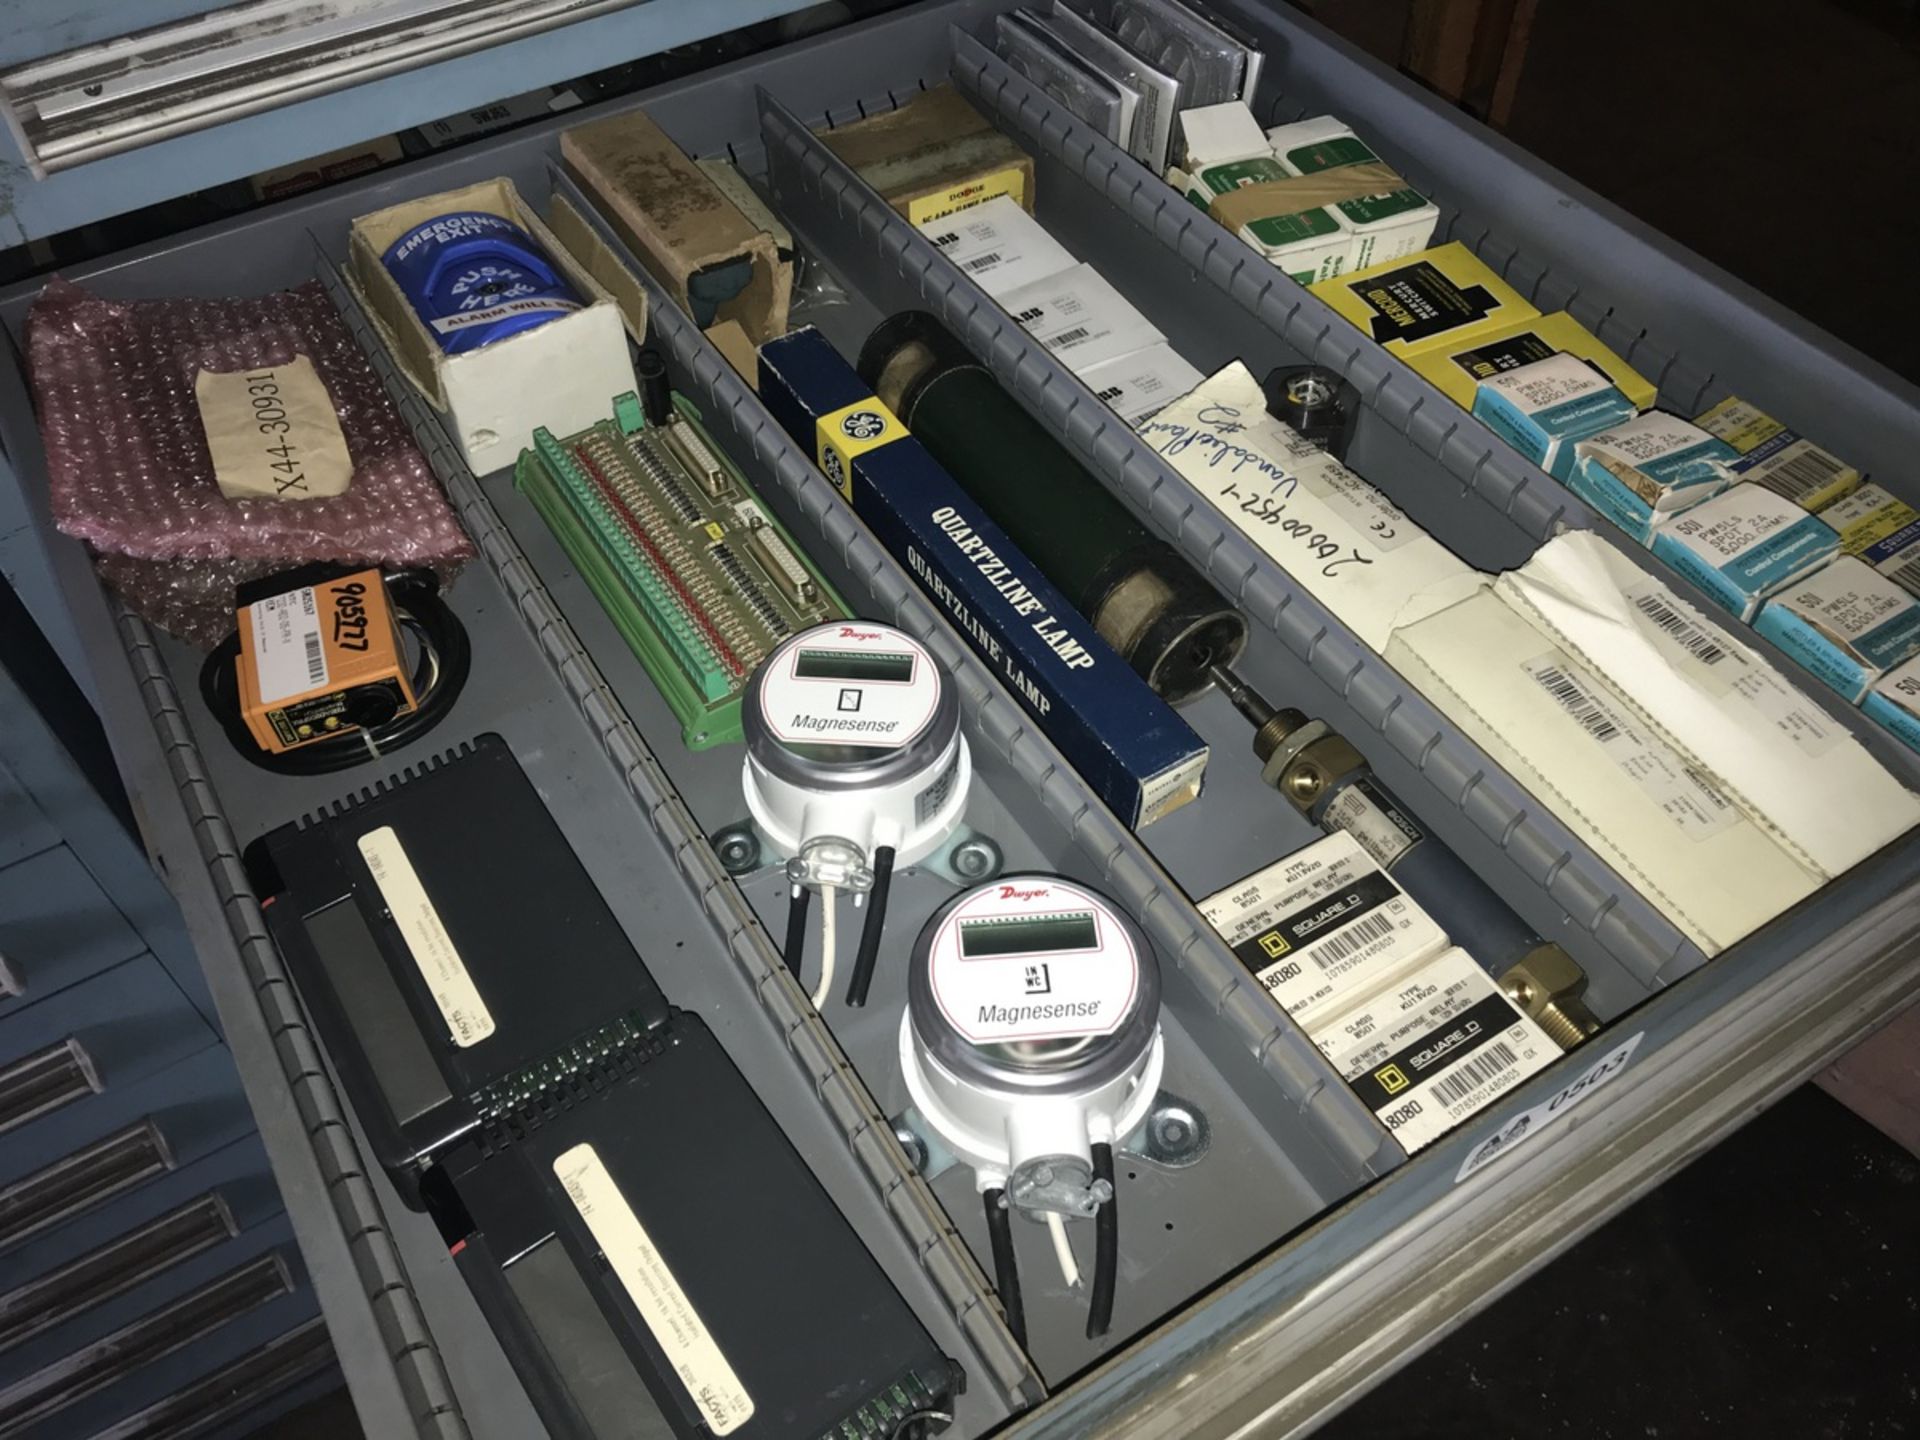 Contents of Drawer including Asco valves, ABB switches, Dwyer sensors, output modules, etc. - Image 3 of 3